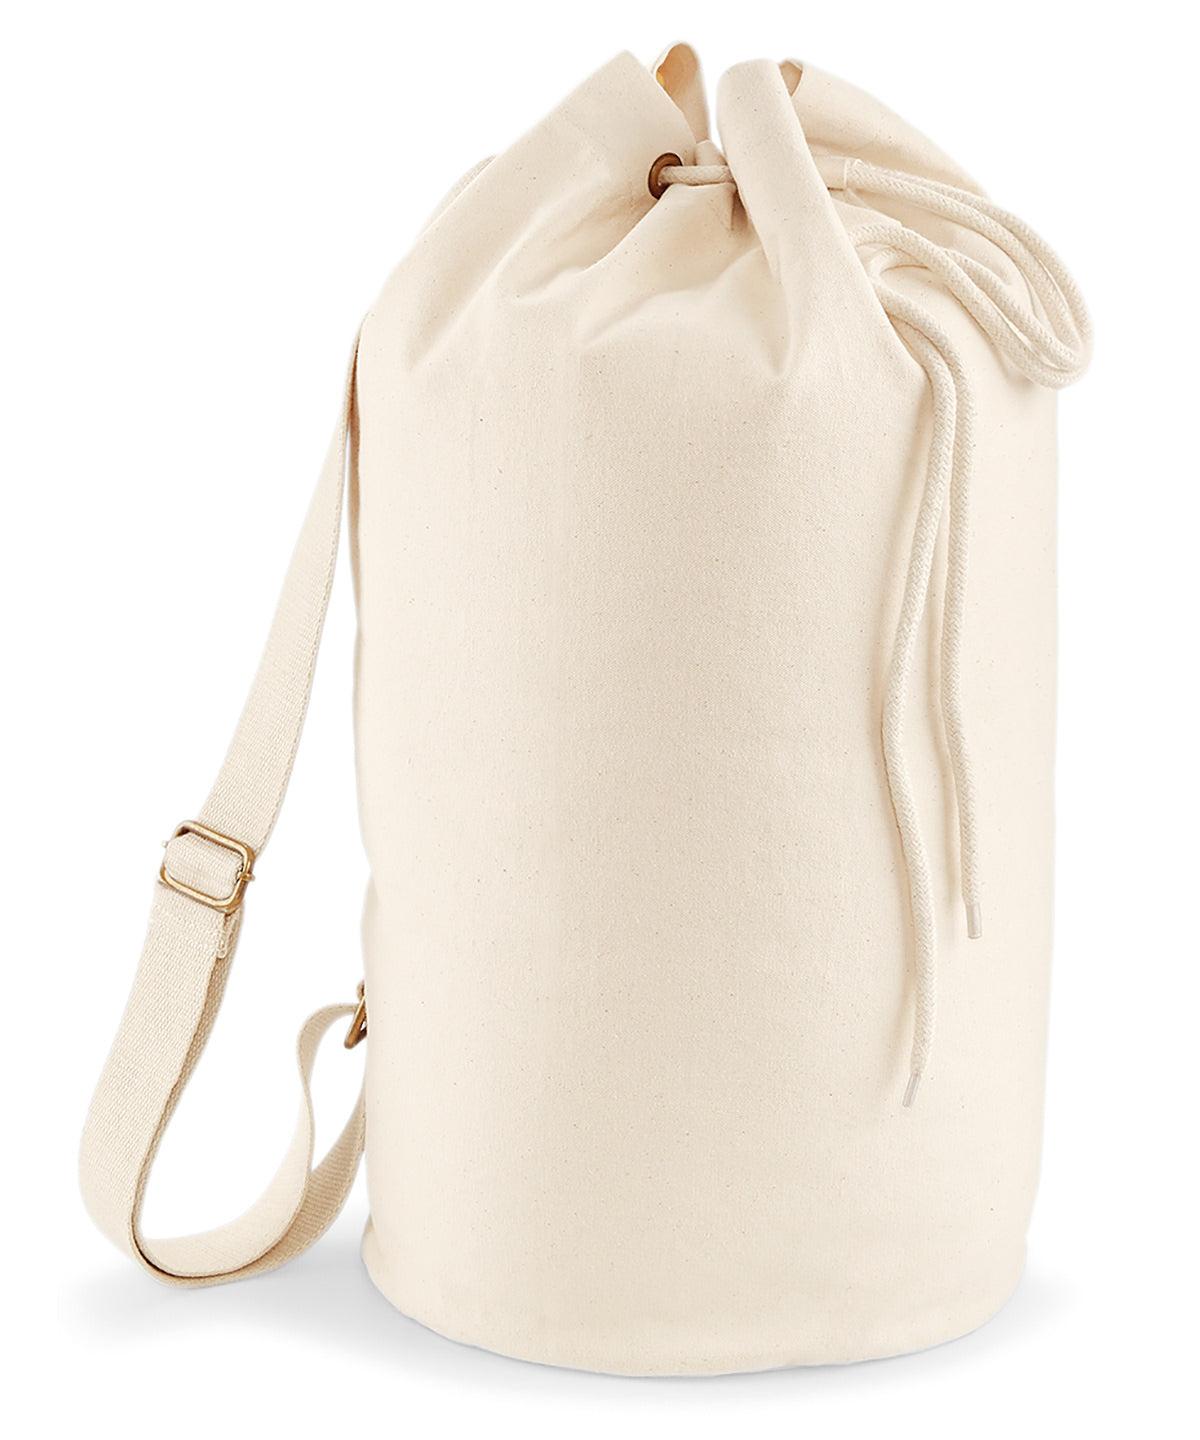 Natural - EarthAware® organic sea bag Bags Westford Mill Bags & Luggage, Holiday Season, Organic & Conscious, Summer Accessories Schoolwear Centres